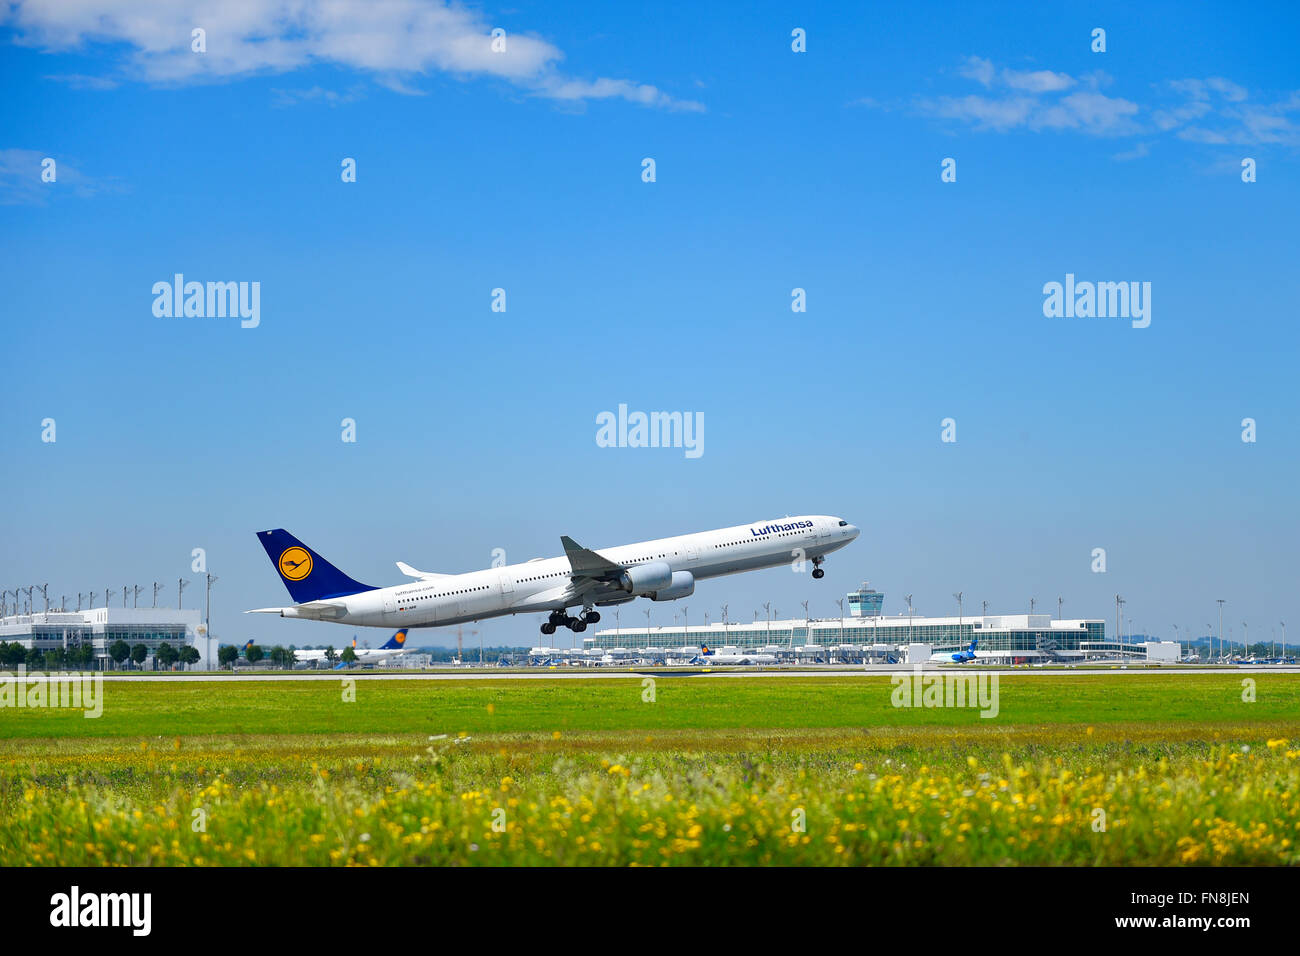 Lufthansa, LH, Airbus, A 340, 600, A340-600, take of, take off, aircraft, airport, overview, panorama, view, aircraft, airplane, Stock Photo